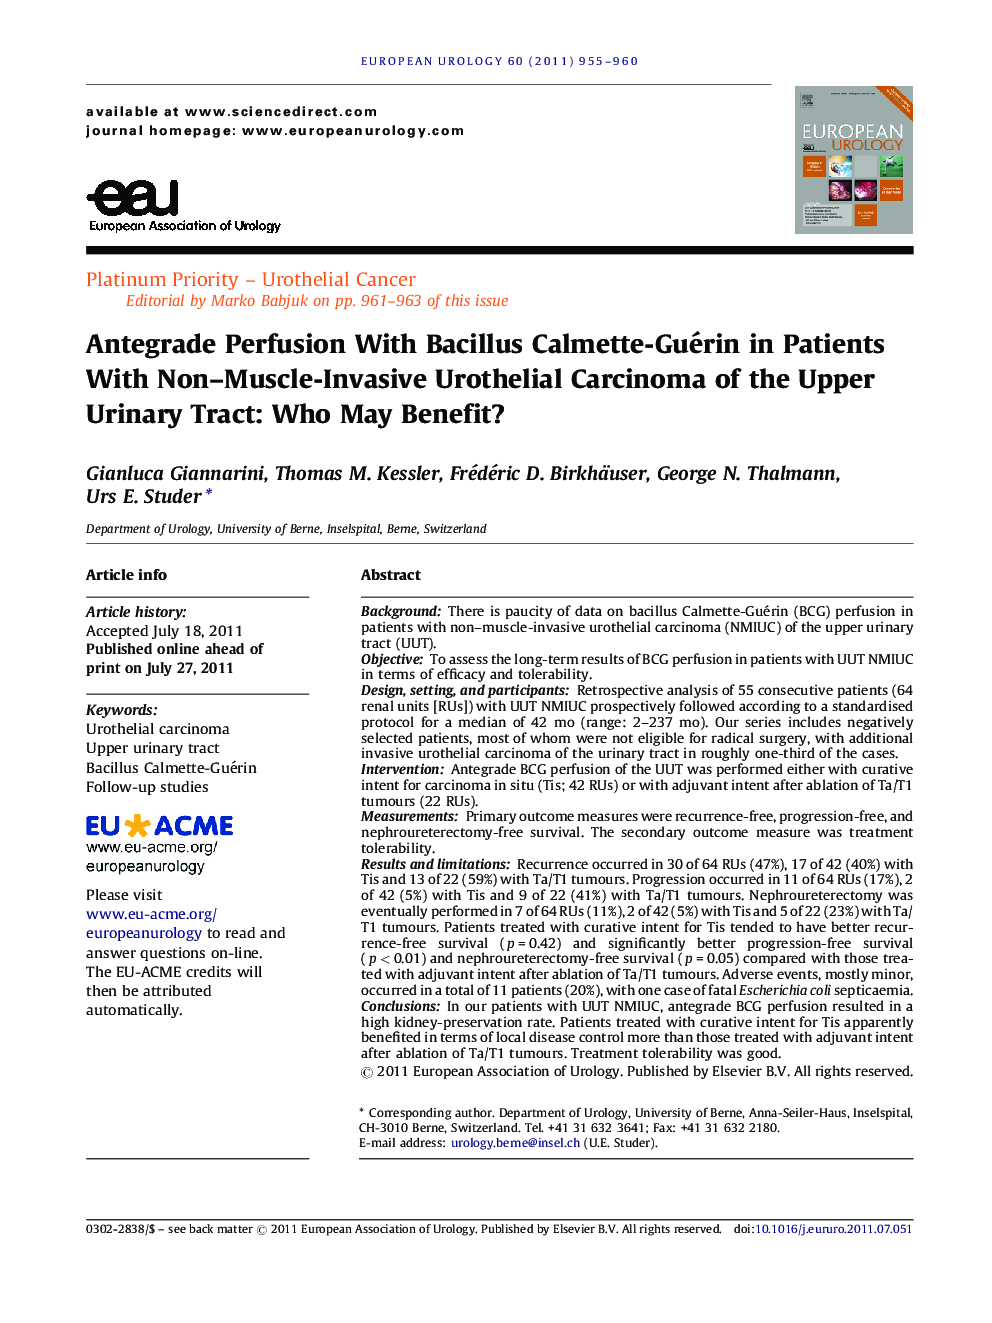 Antegrade Perfusion With Bacillus Calmette-Guérin in Patients With Non–Muscle-Invasive Urothelial Carcinoma of the Upper Urinary Tract: Who May Benefit? 